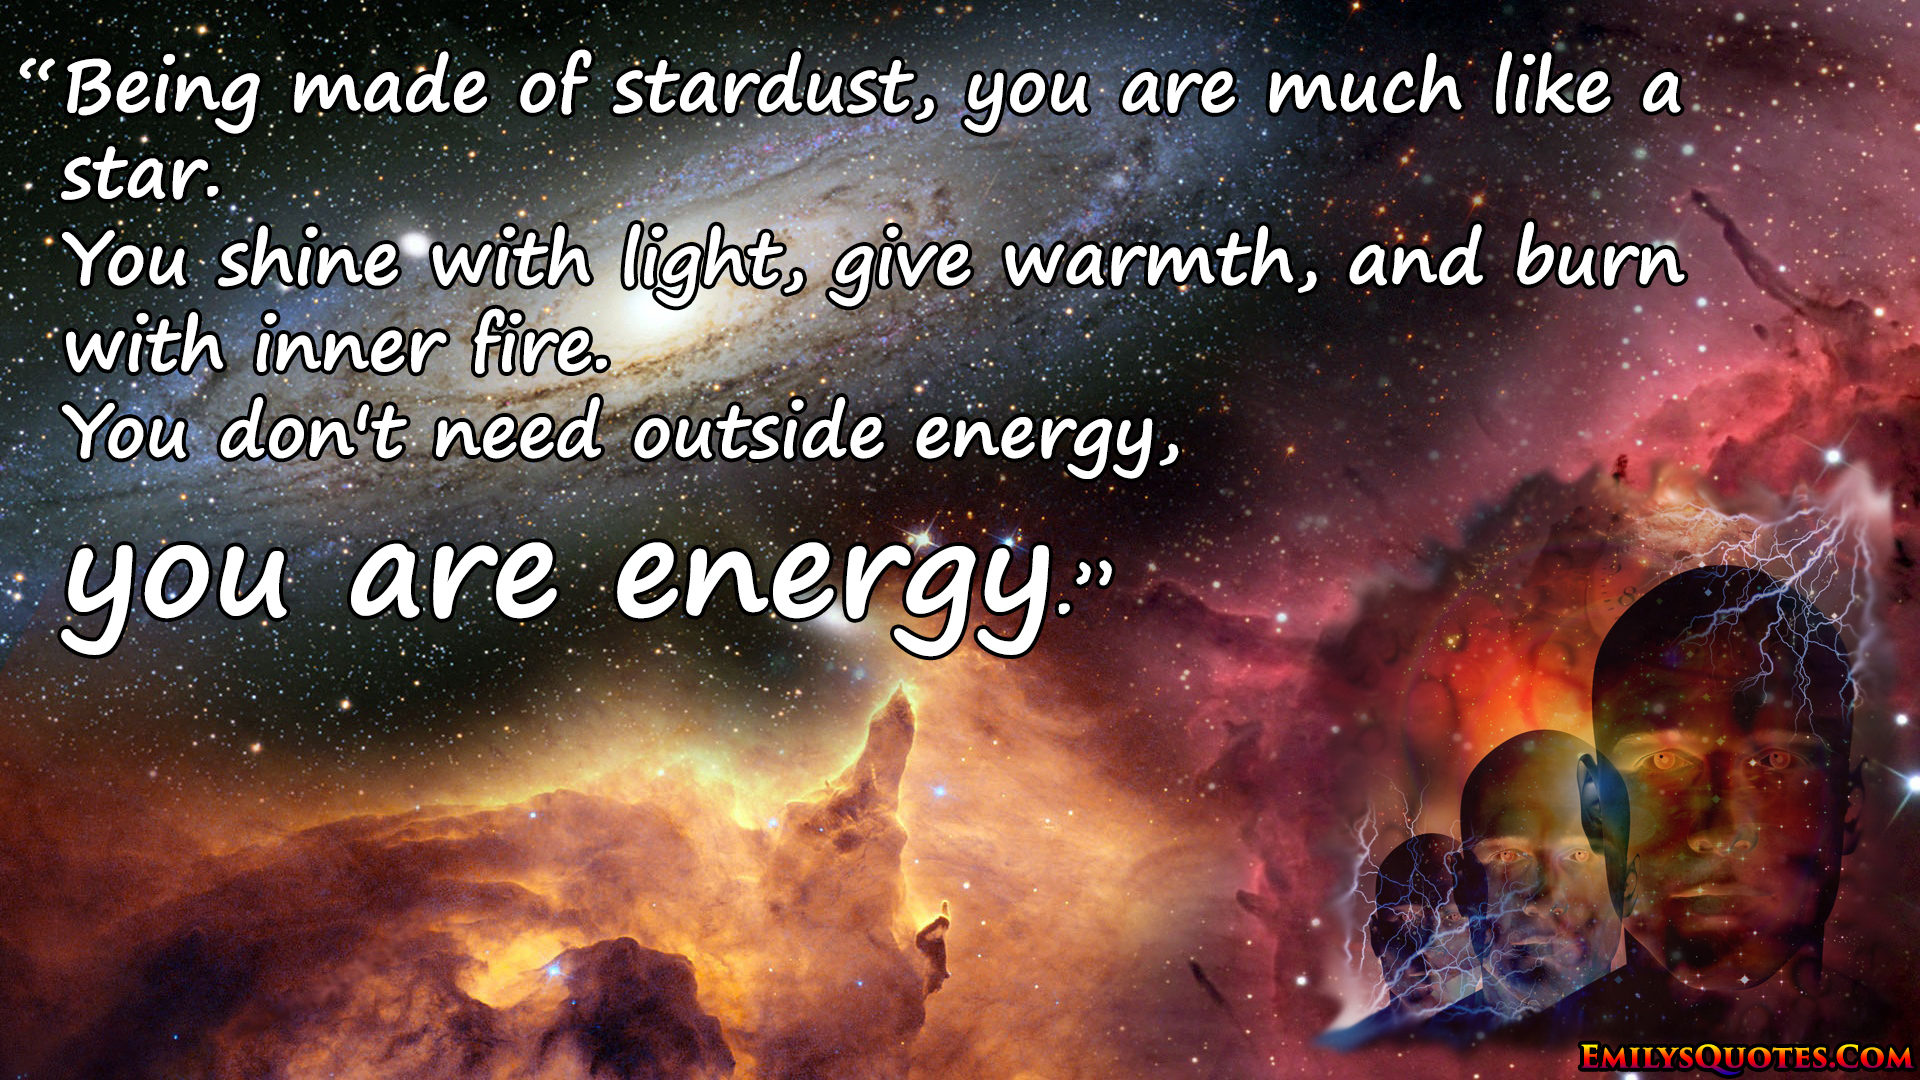 Being made of stardust, you are much like a star. You shine with light, give warmth, and burn with inner fire.